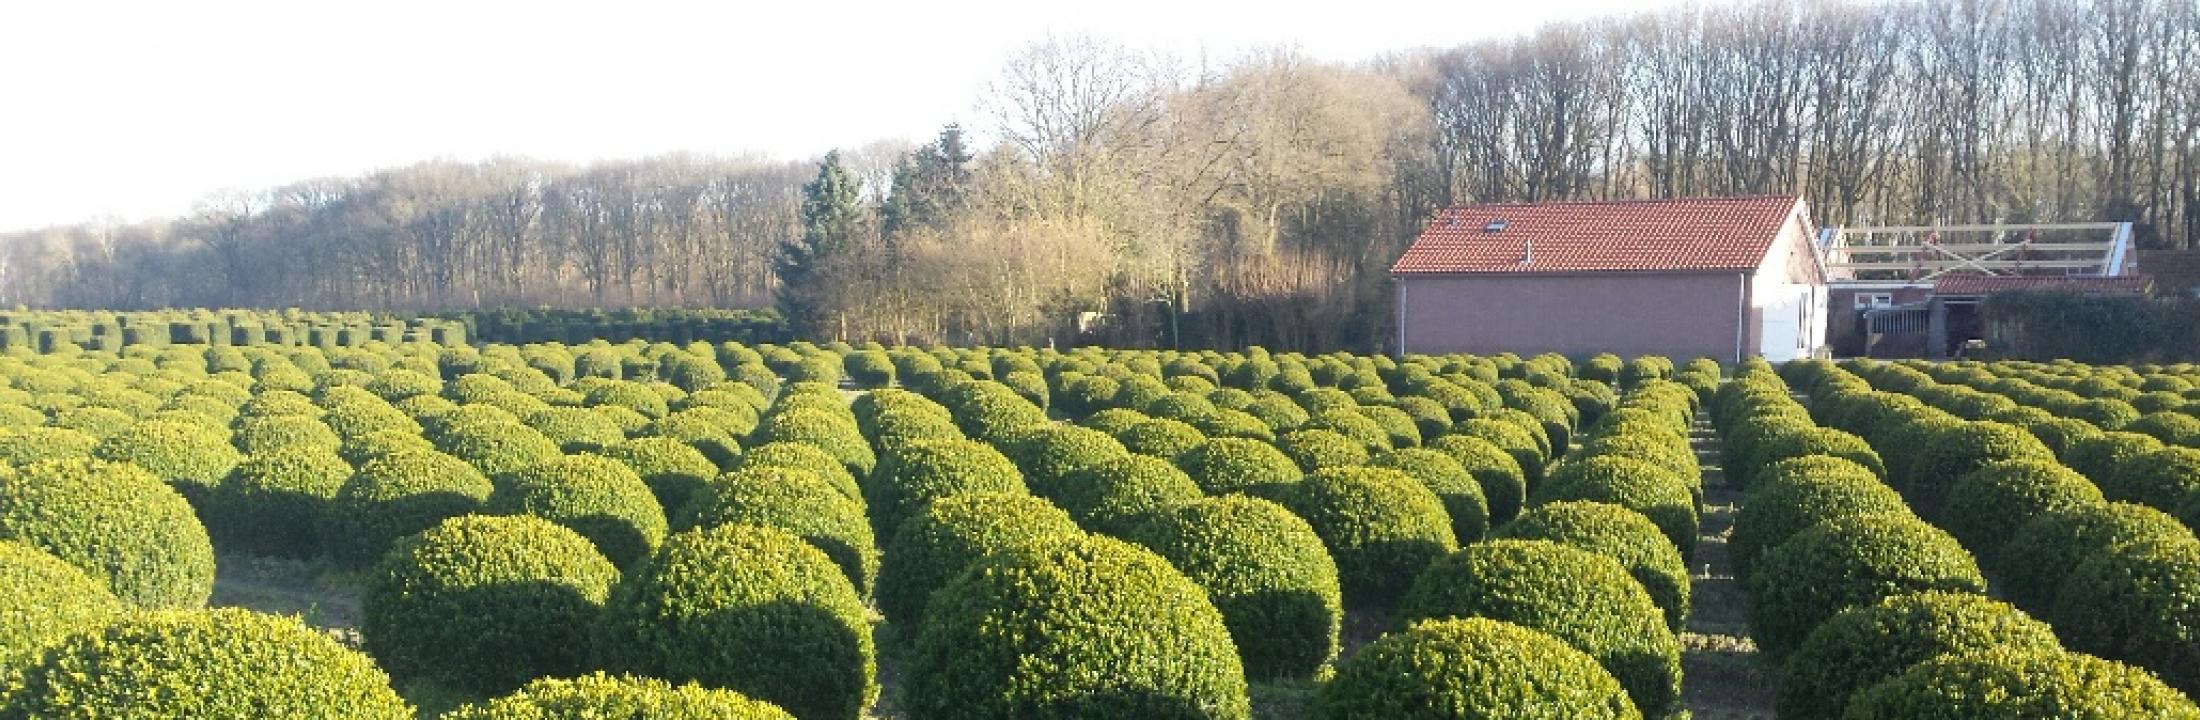 Buxus sempervirens ball - Ron Le Poole - Holland